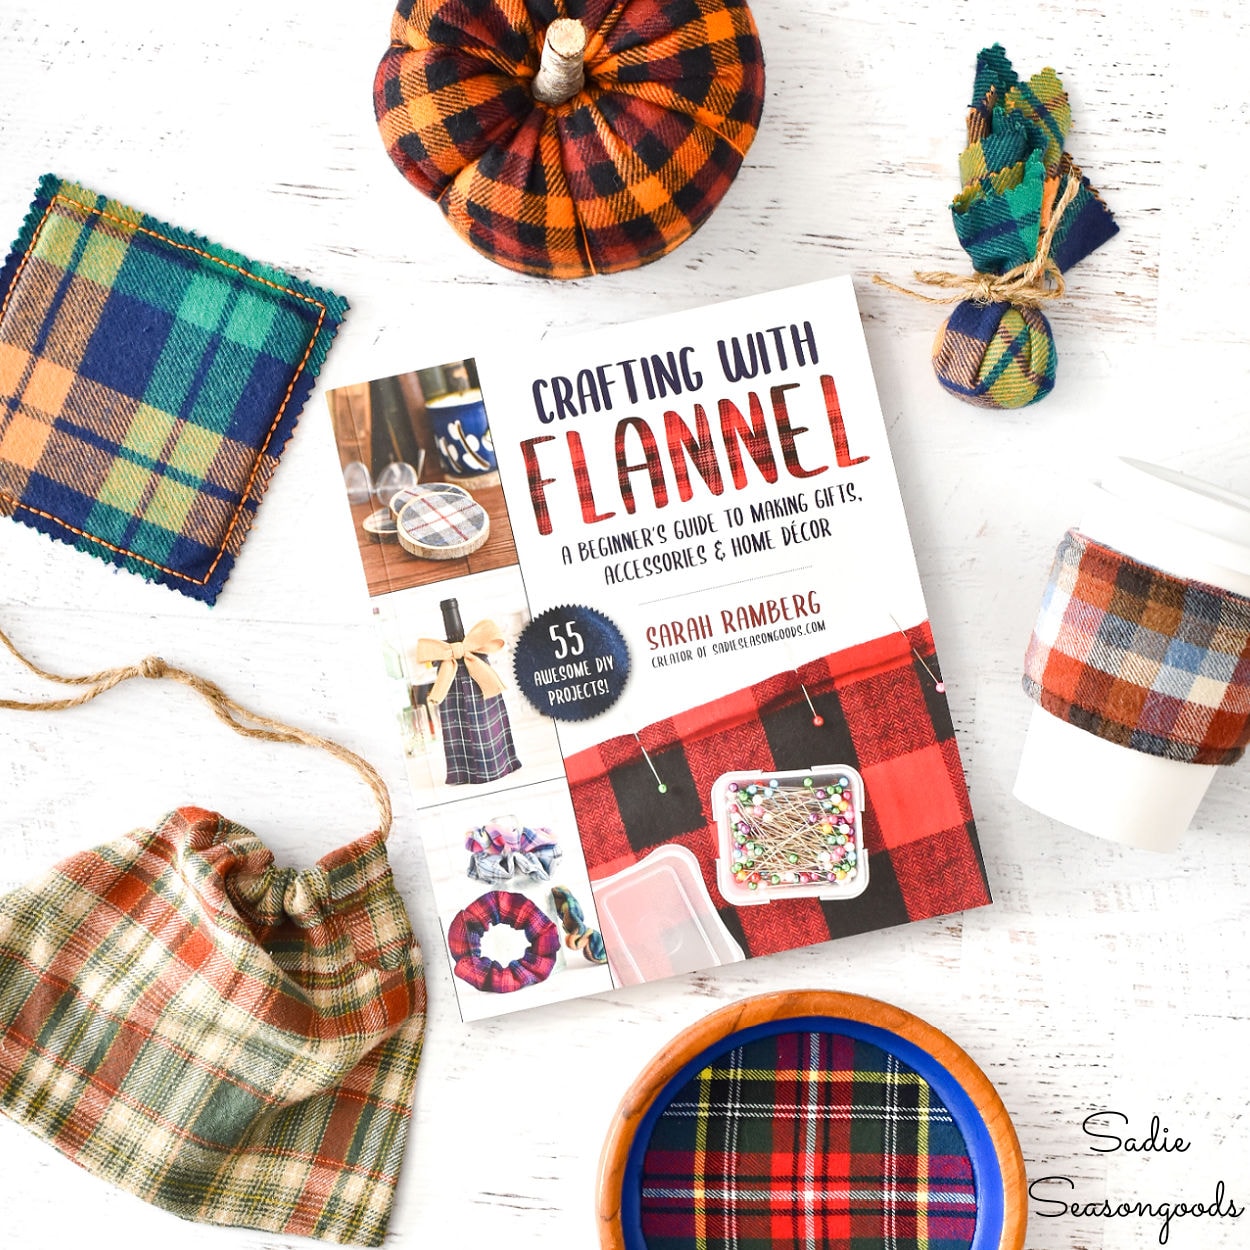 My Craft Book, “Crafting with Flannel”, is Now Available!